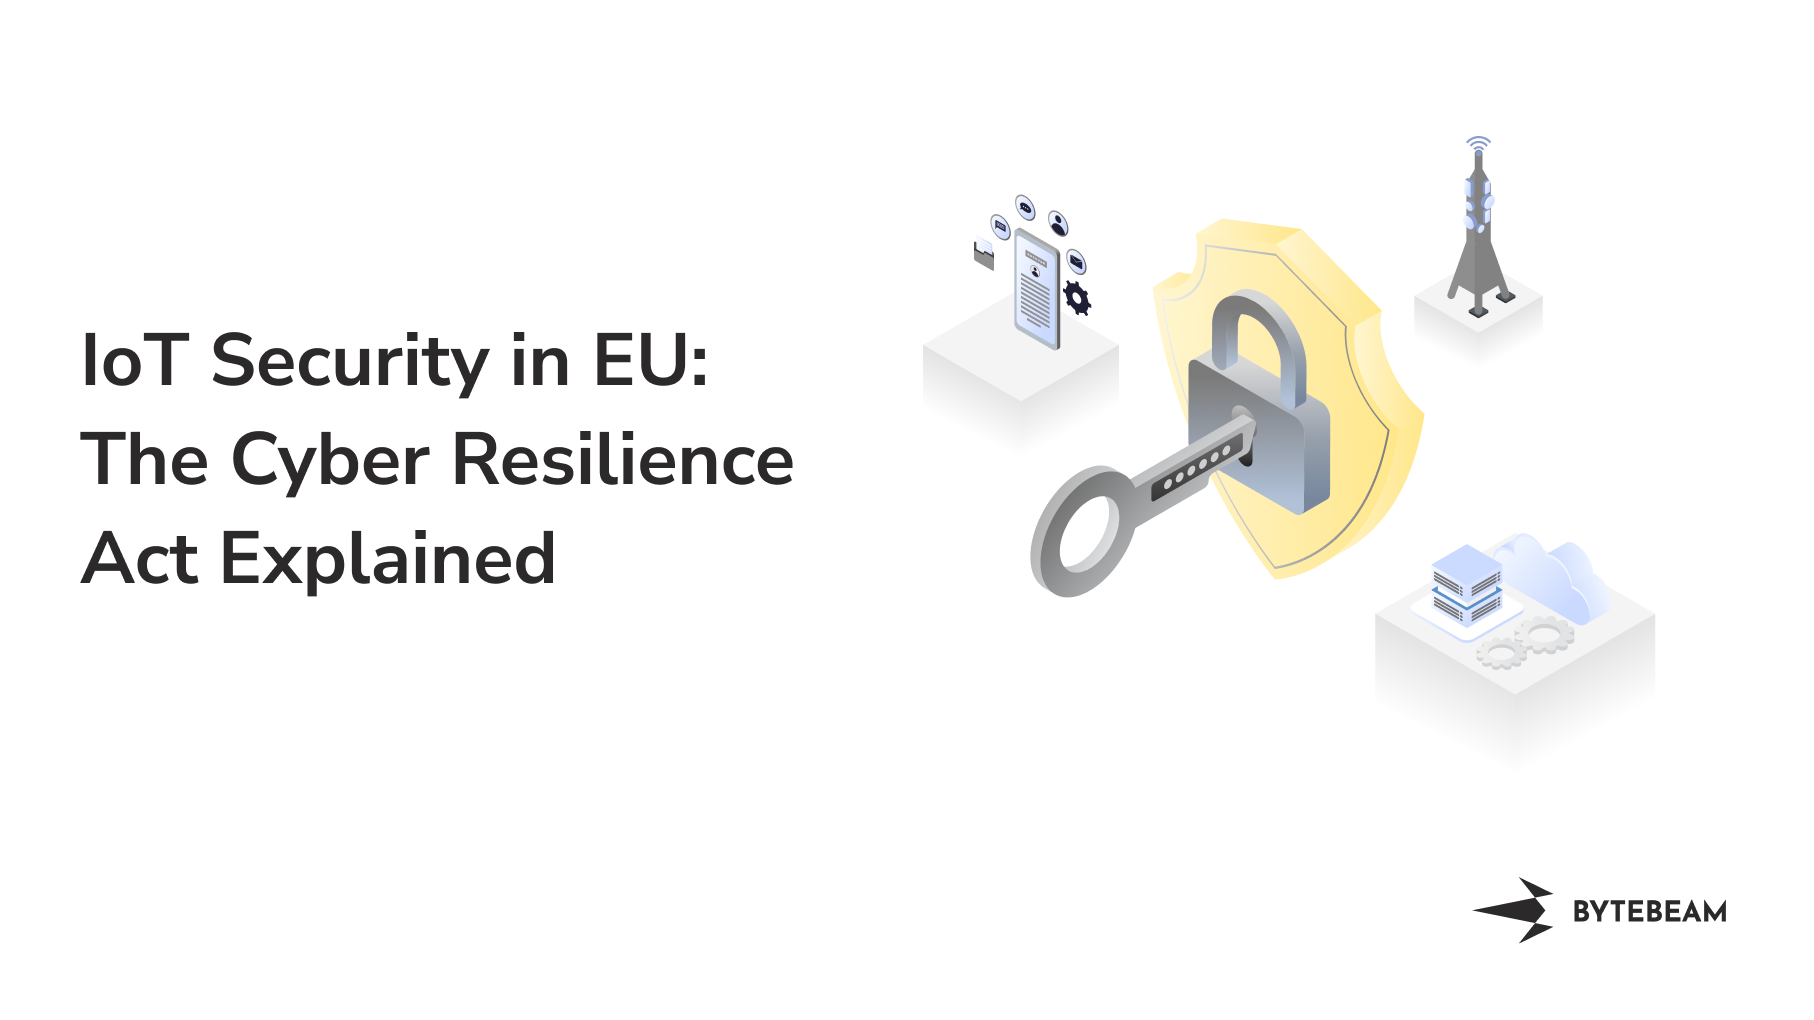 IoT Security in EU: The Cyber Resilience Act Explained